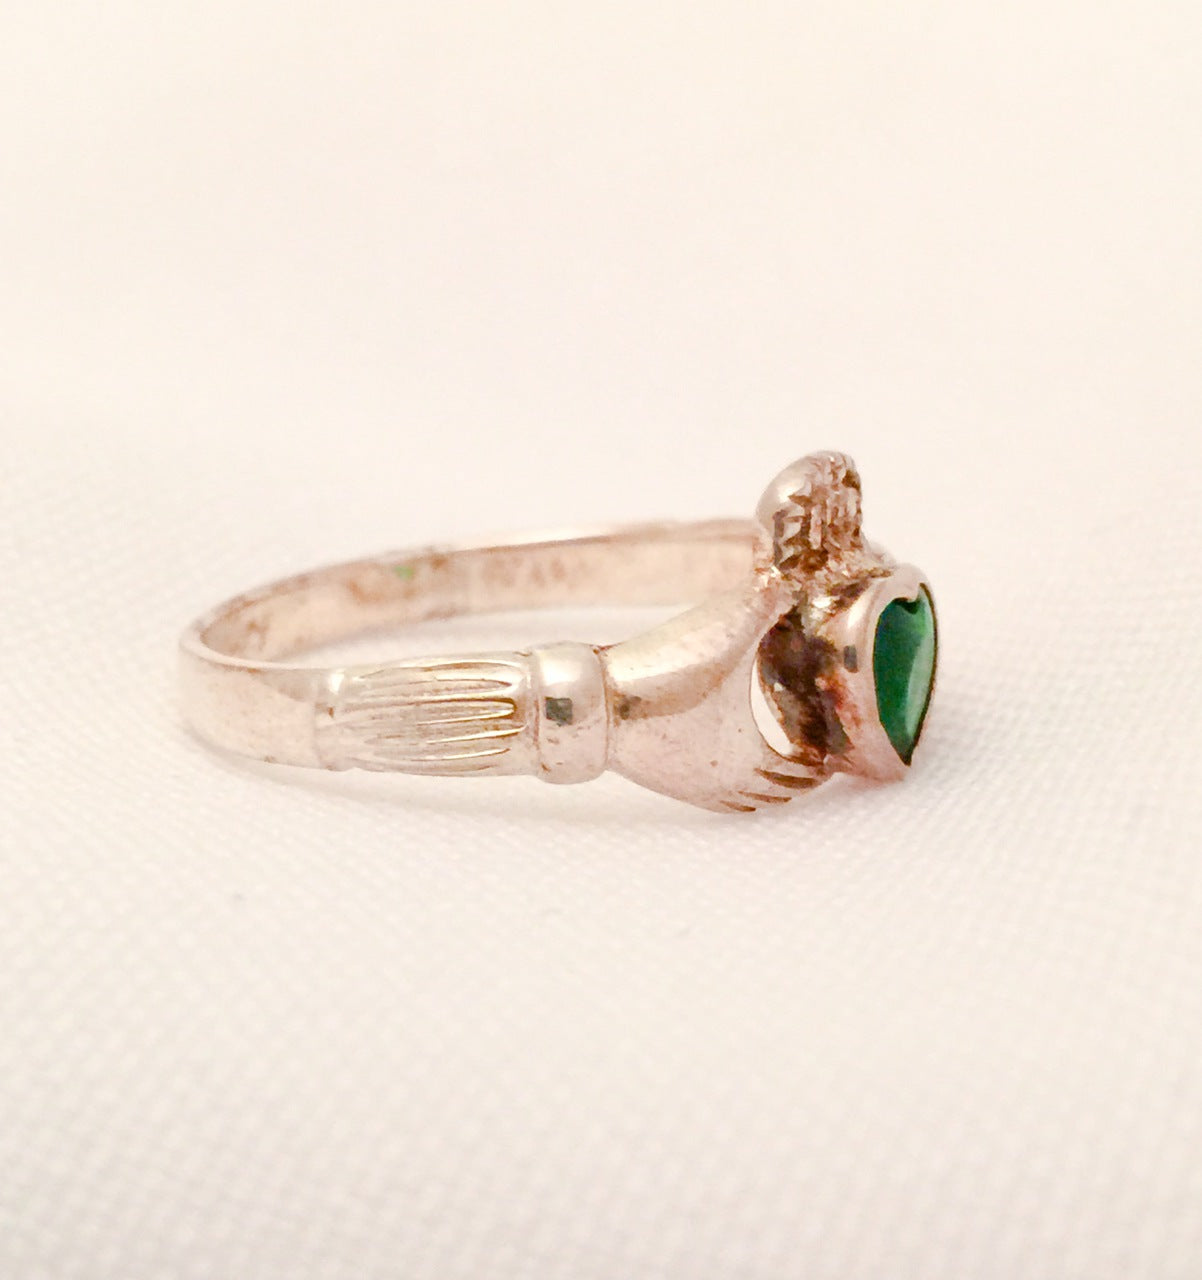 Vintage Claddagh Sterling Silver Ring with Green Stone Size 9